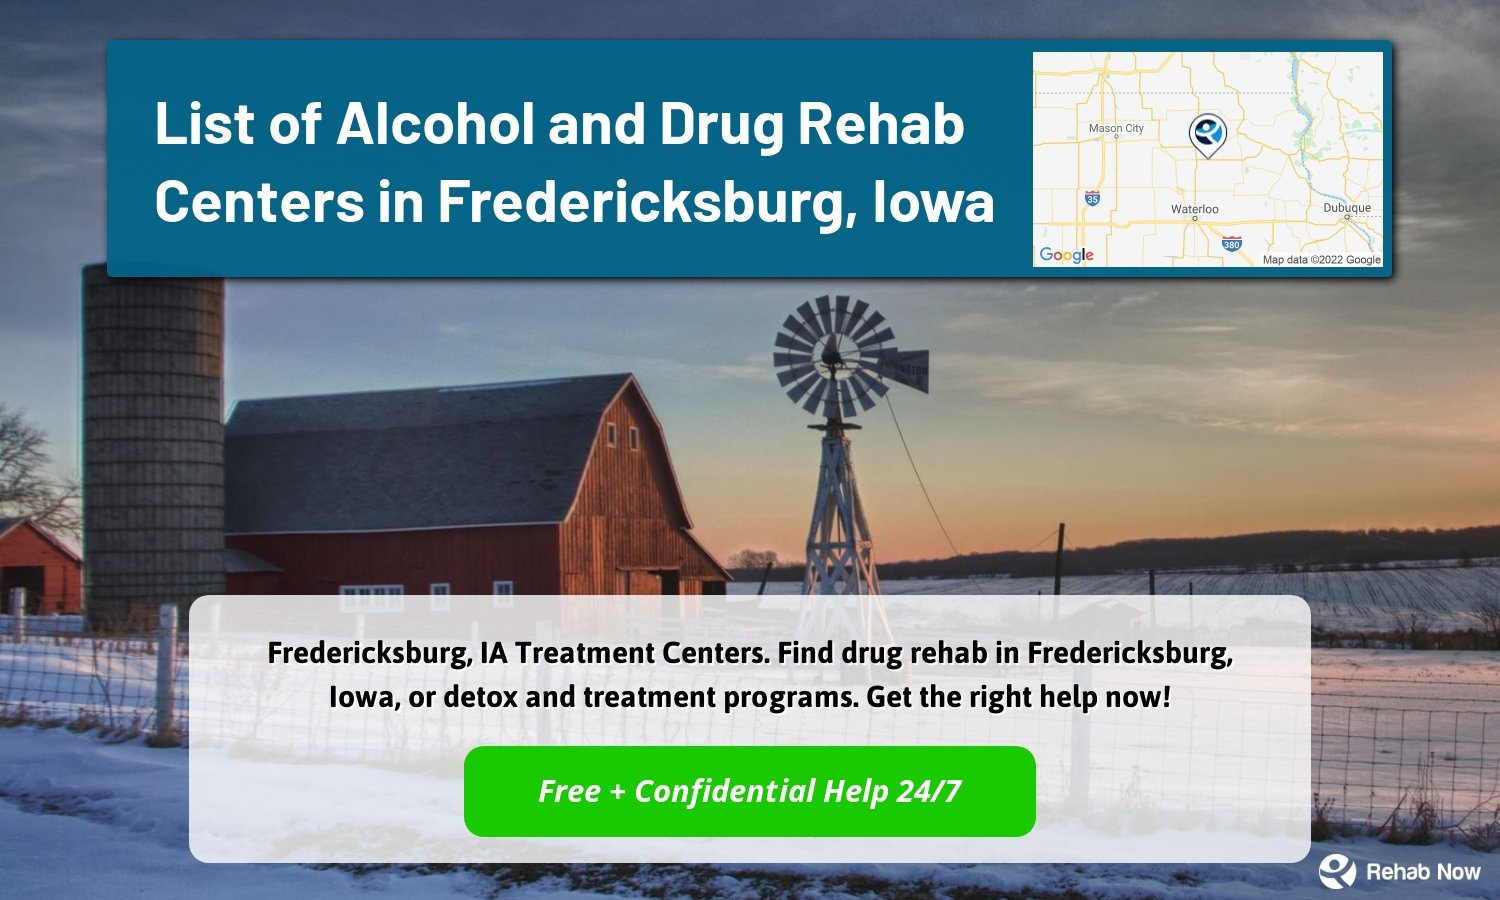 Fredericksburg, IA Treatment Centers. Find drug rehab in Fredericksburg, Iowa, or detox and treatment programs. Get the right help now!